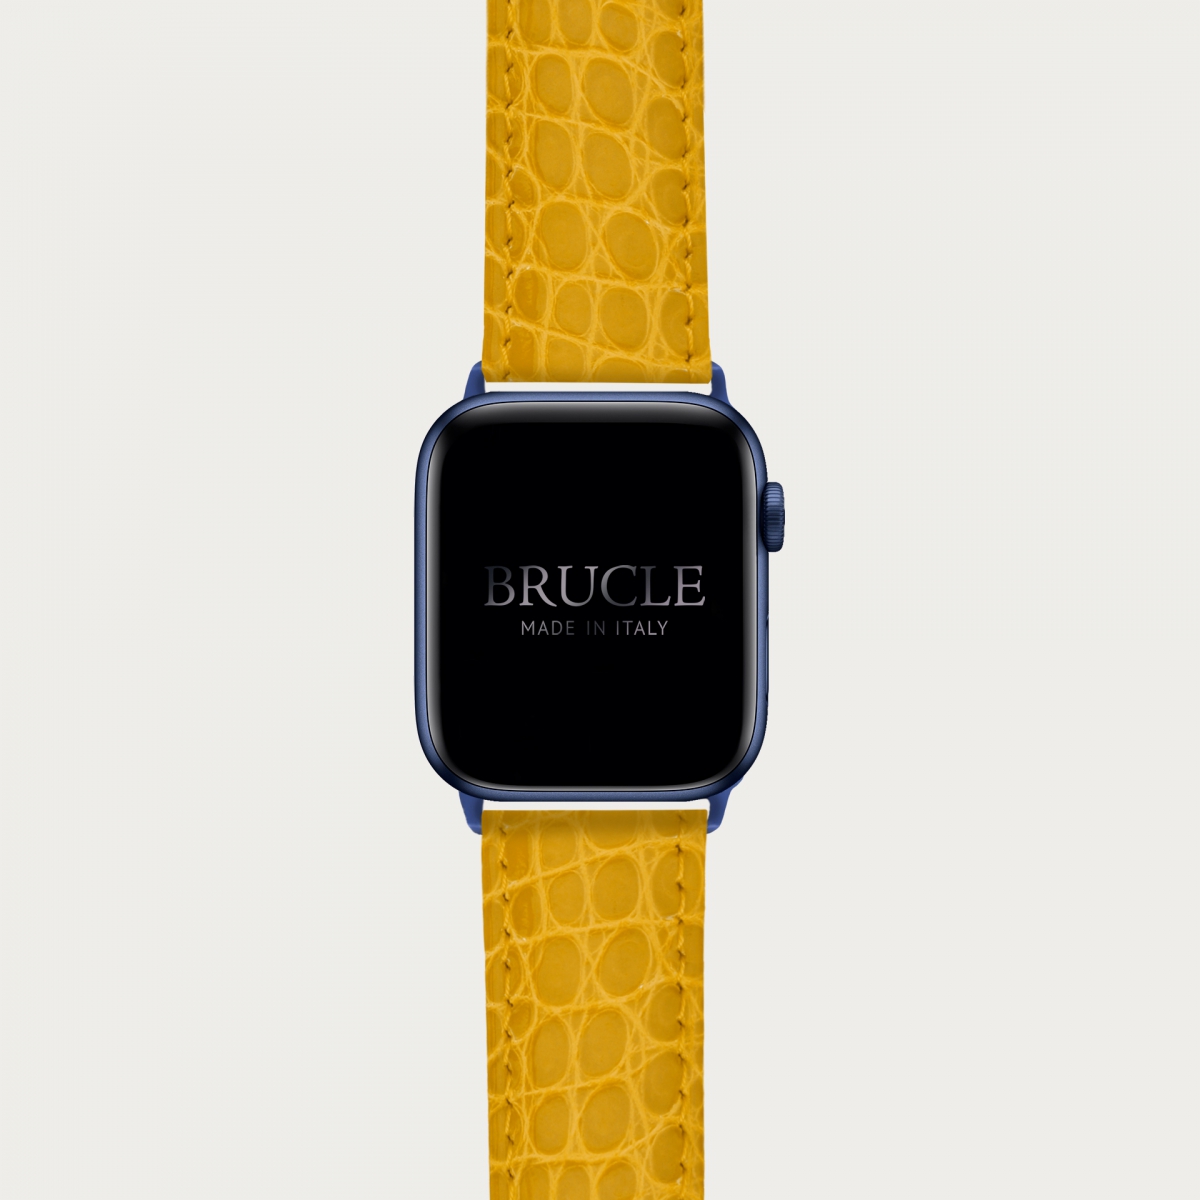 Leather Watch band compatible with Apple Watch / Samsung smartwatch, alligator yellow